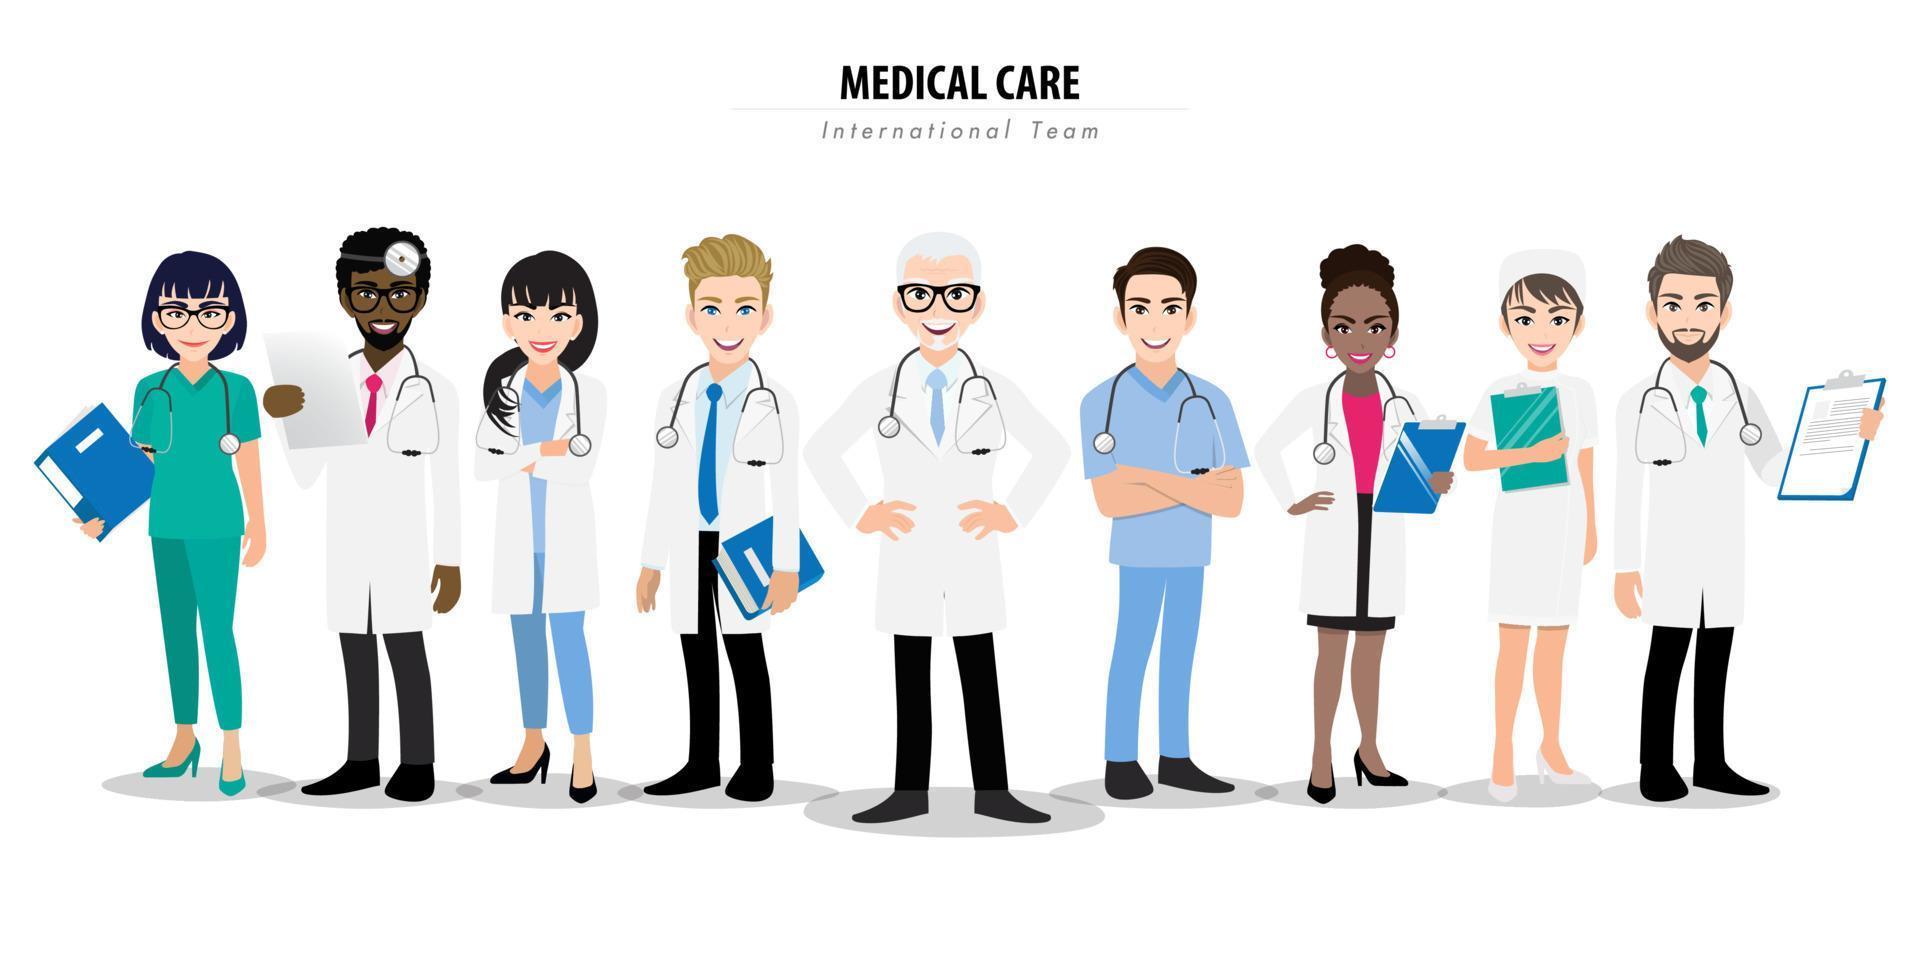 Group of doctors and a nurse team standing together in different poses. Team of medical workers on a white background. Hospital staff. Cartoon character design vector